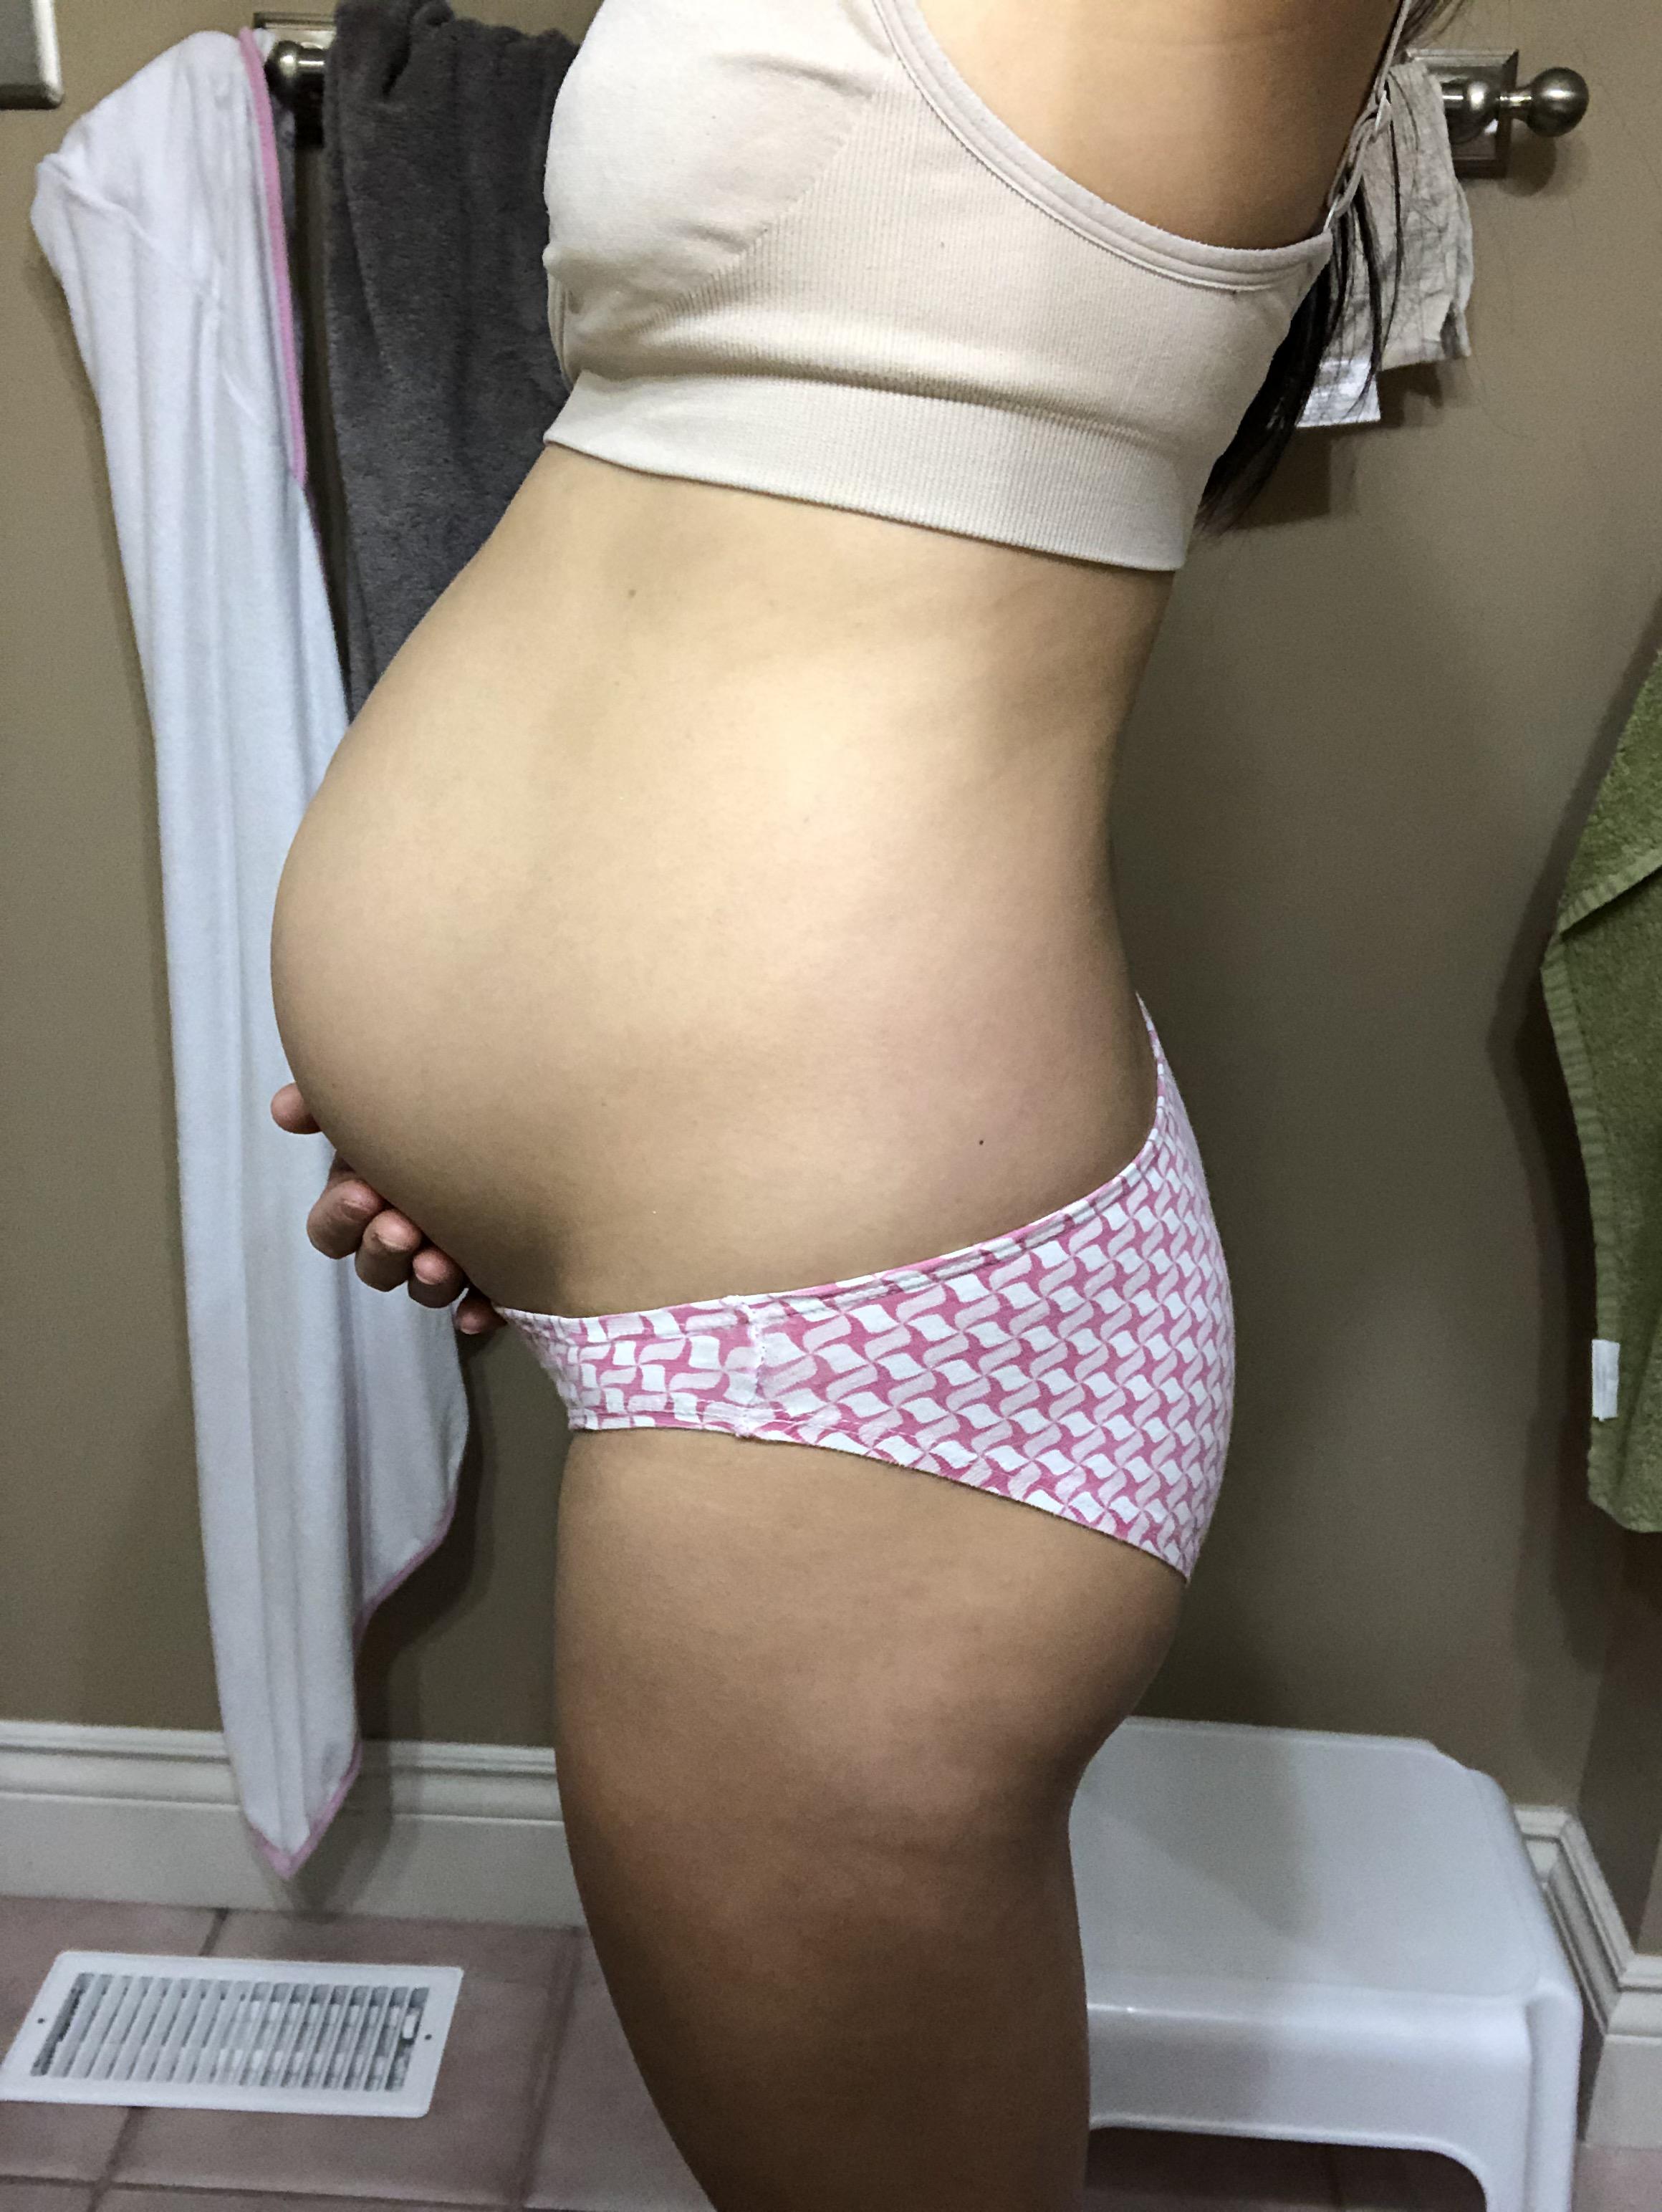 18 weeks. No boobs and no ass. Oh well image